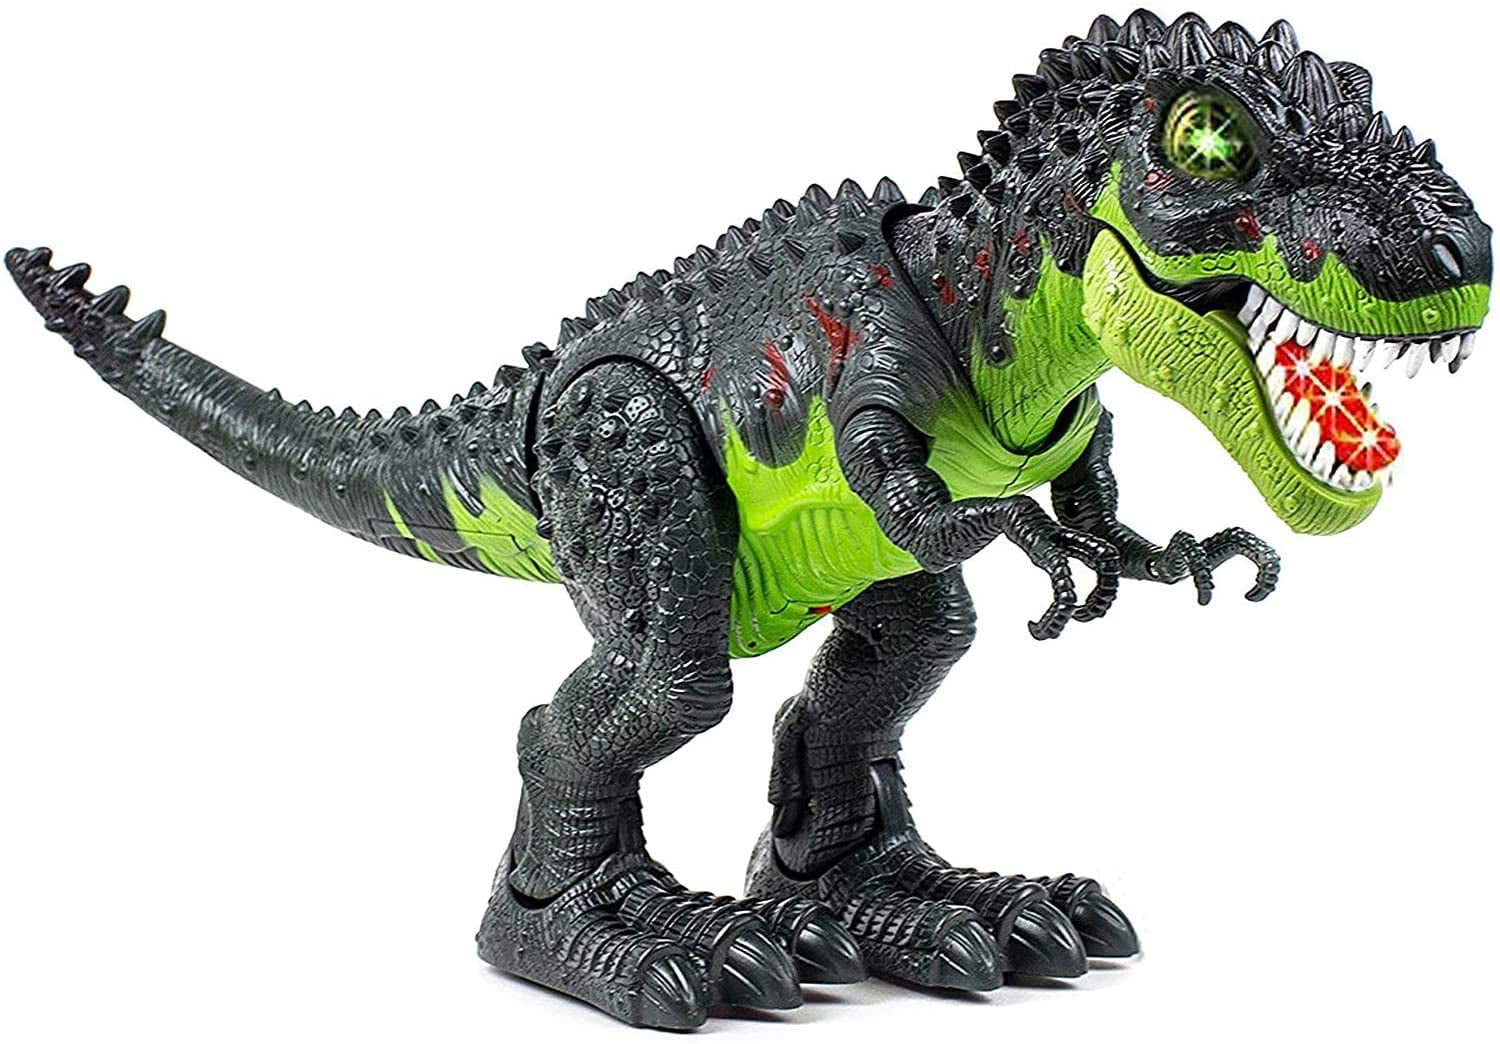 Walking T-Rex Dinosaur Robot Toys for Kids with Lights and Sounds Color may vary 